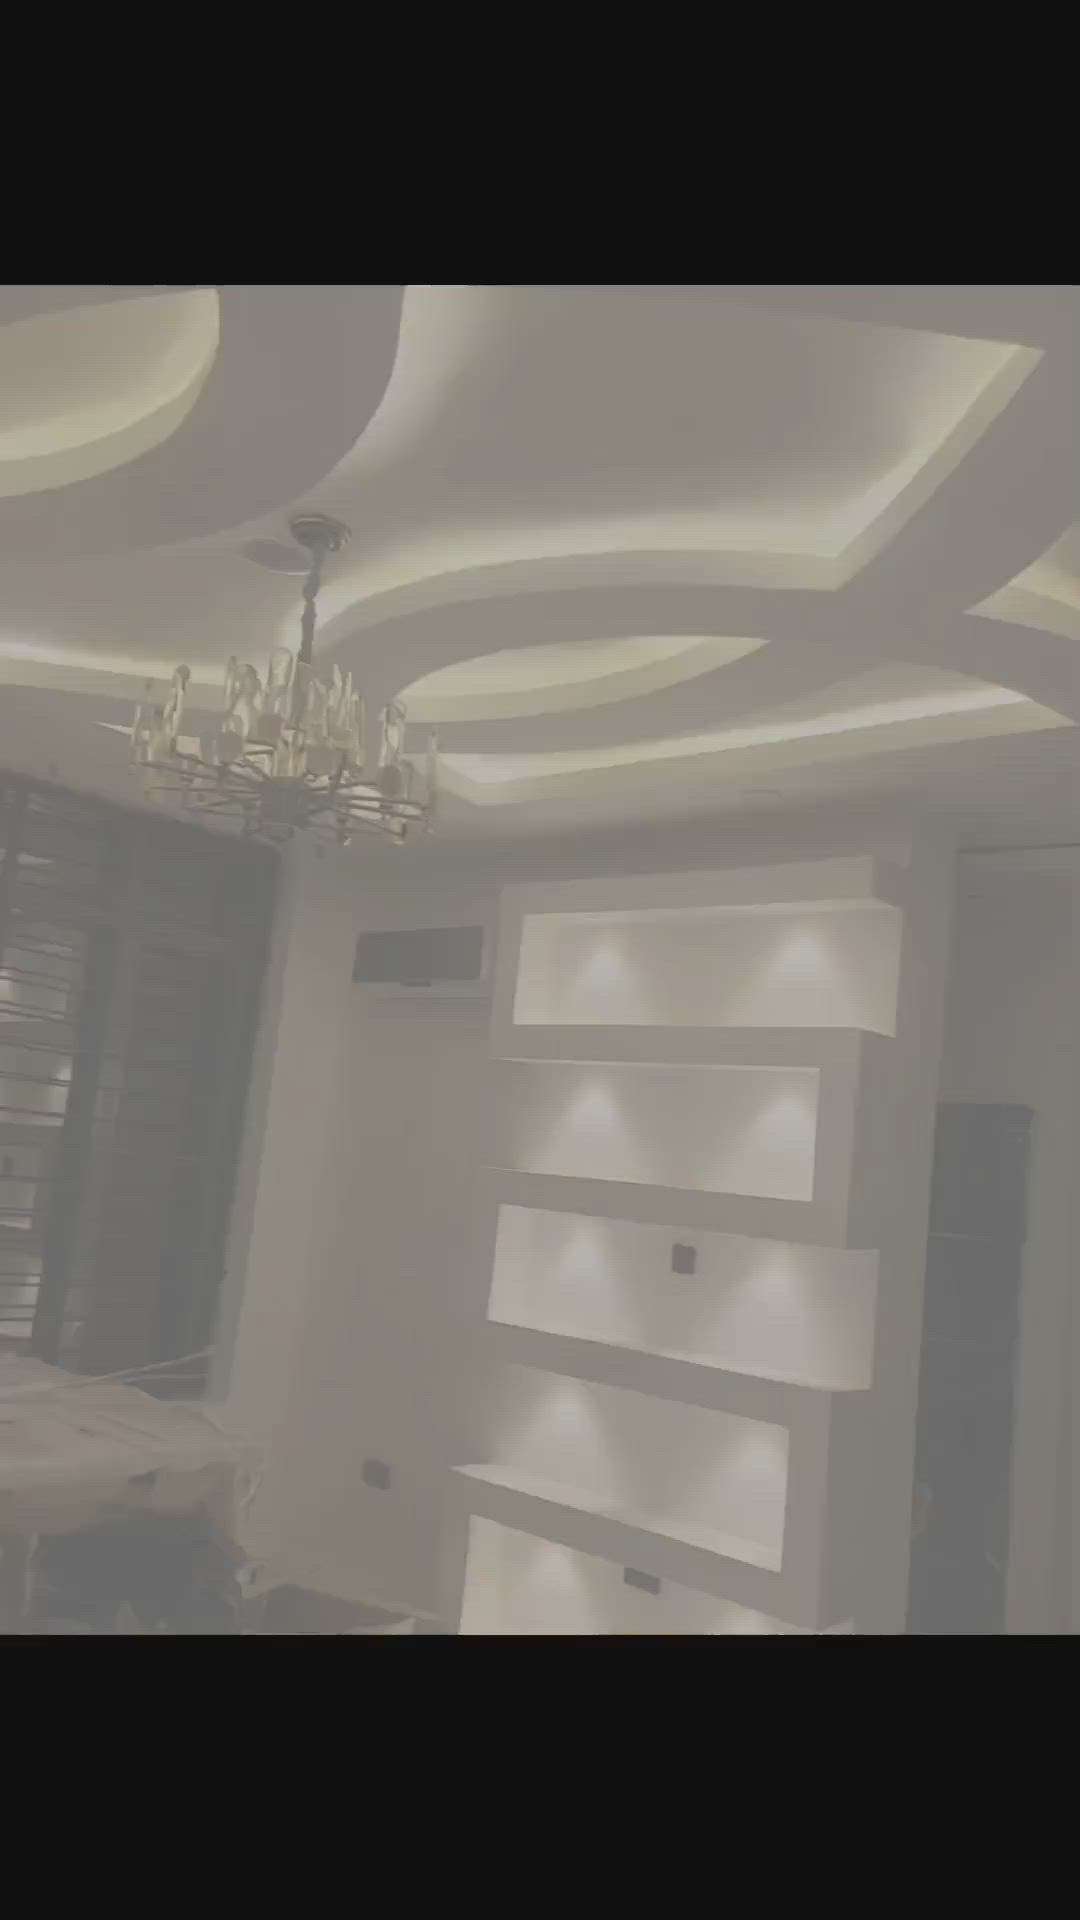 for false ceiling contact us 7999309933 #HouseDesigns #beautifulhouse #indoordesign #FalseCeiling #popceiling